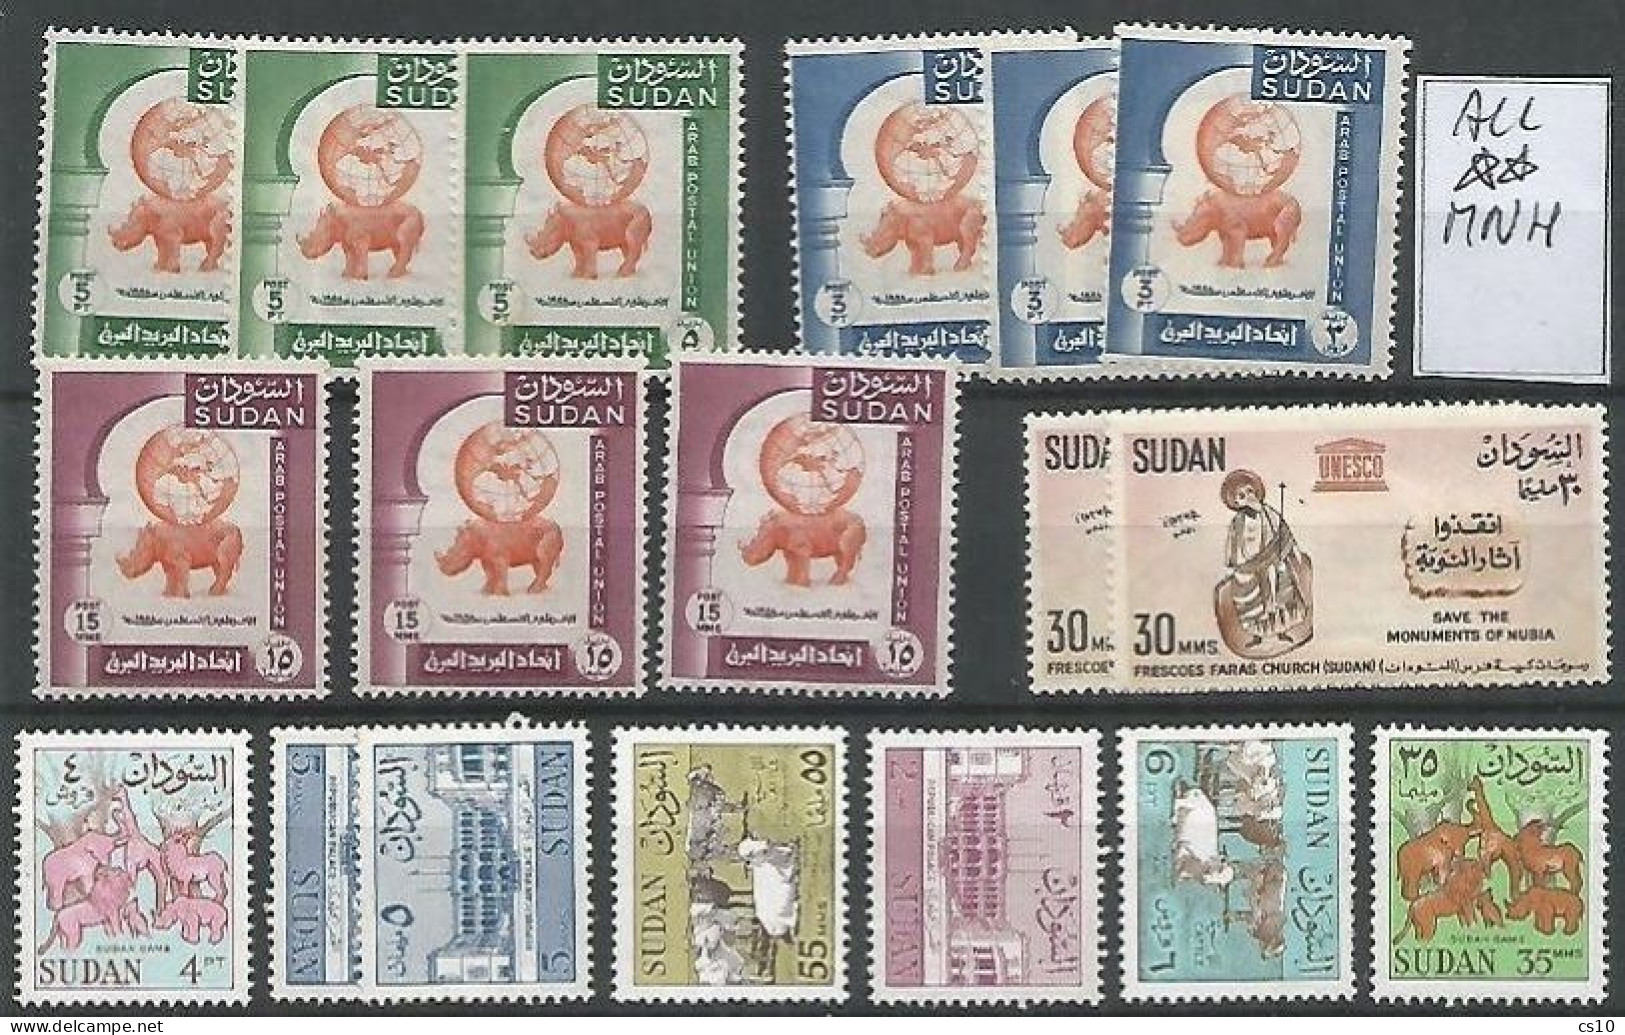 Sudan #2+1 Scans Study Lot Used Stamps Incl. Some HVs, Pairs Strips & Blocks, Service + Some Piece + 1 Scan MNH - Lots & Kiloware (mixtures) - Max. 999 Stamps